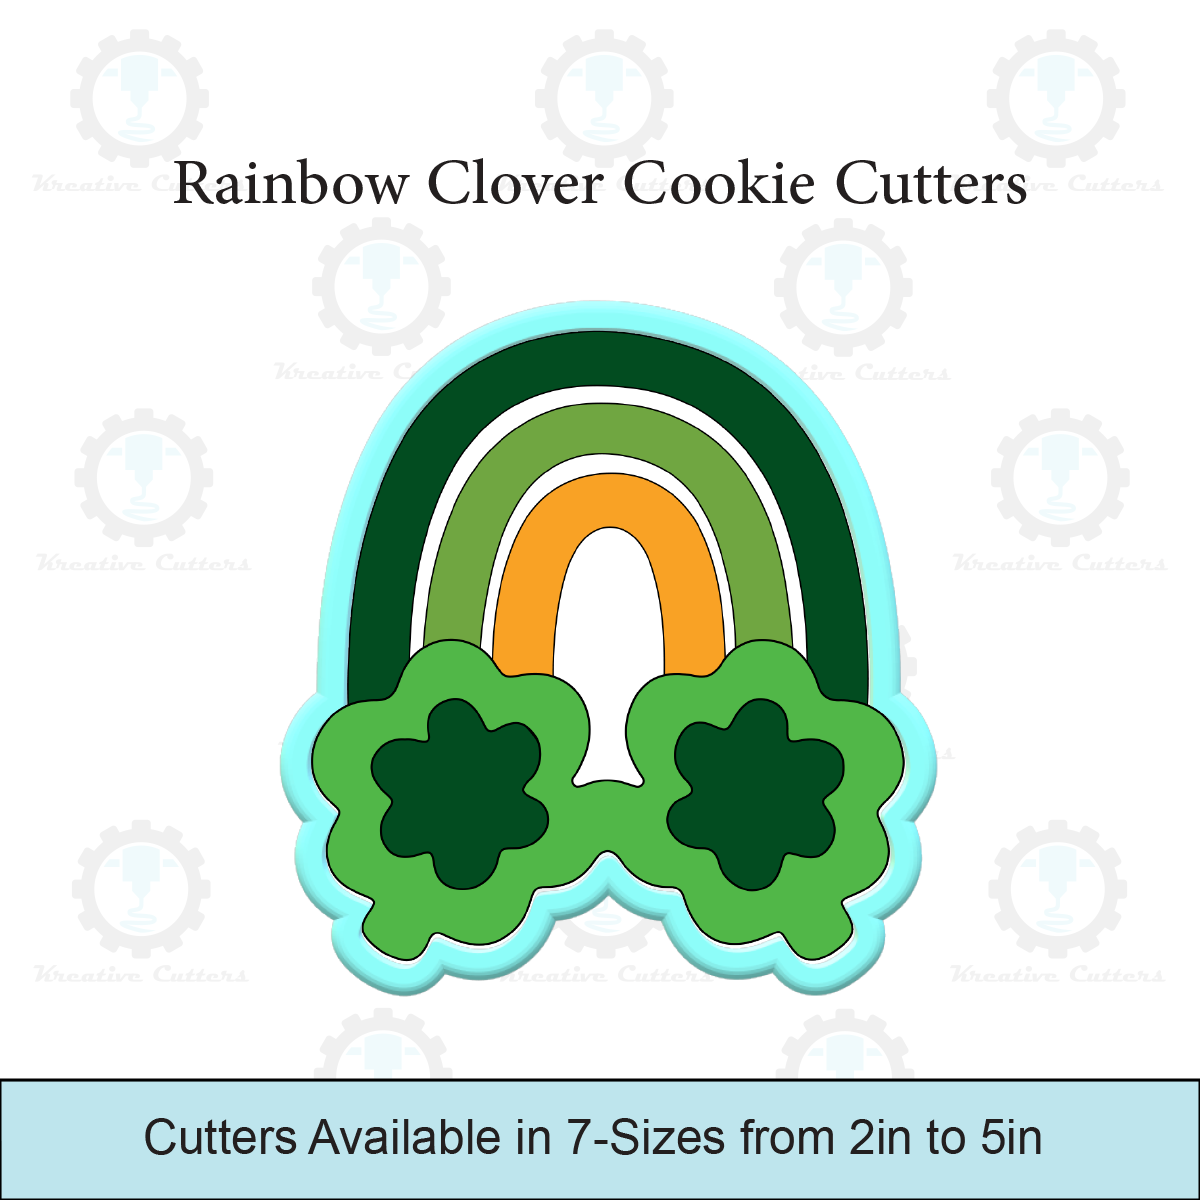 Rainbow Clover Sunglasses Cookie Cutters